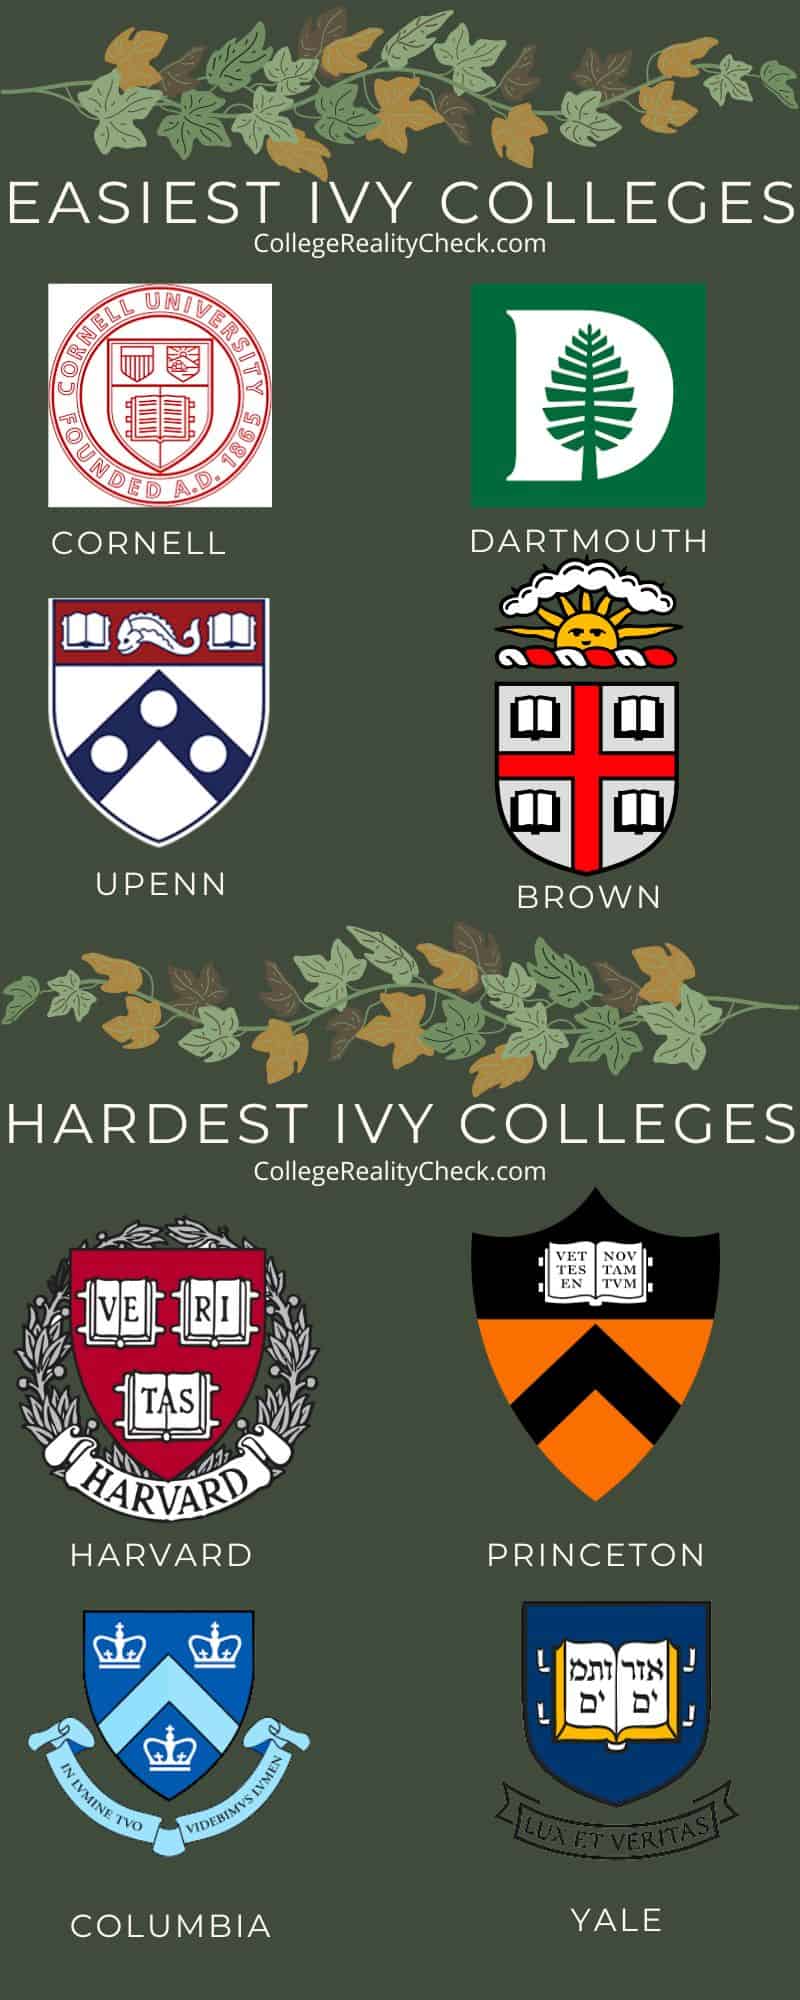 Easiest and Hardest Ivy Colleges